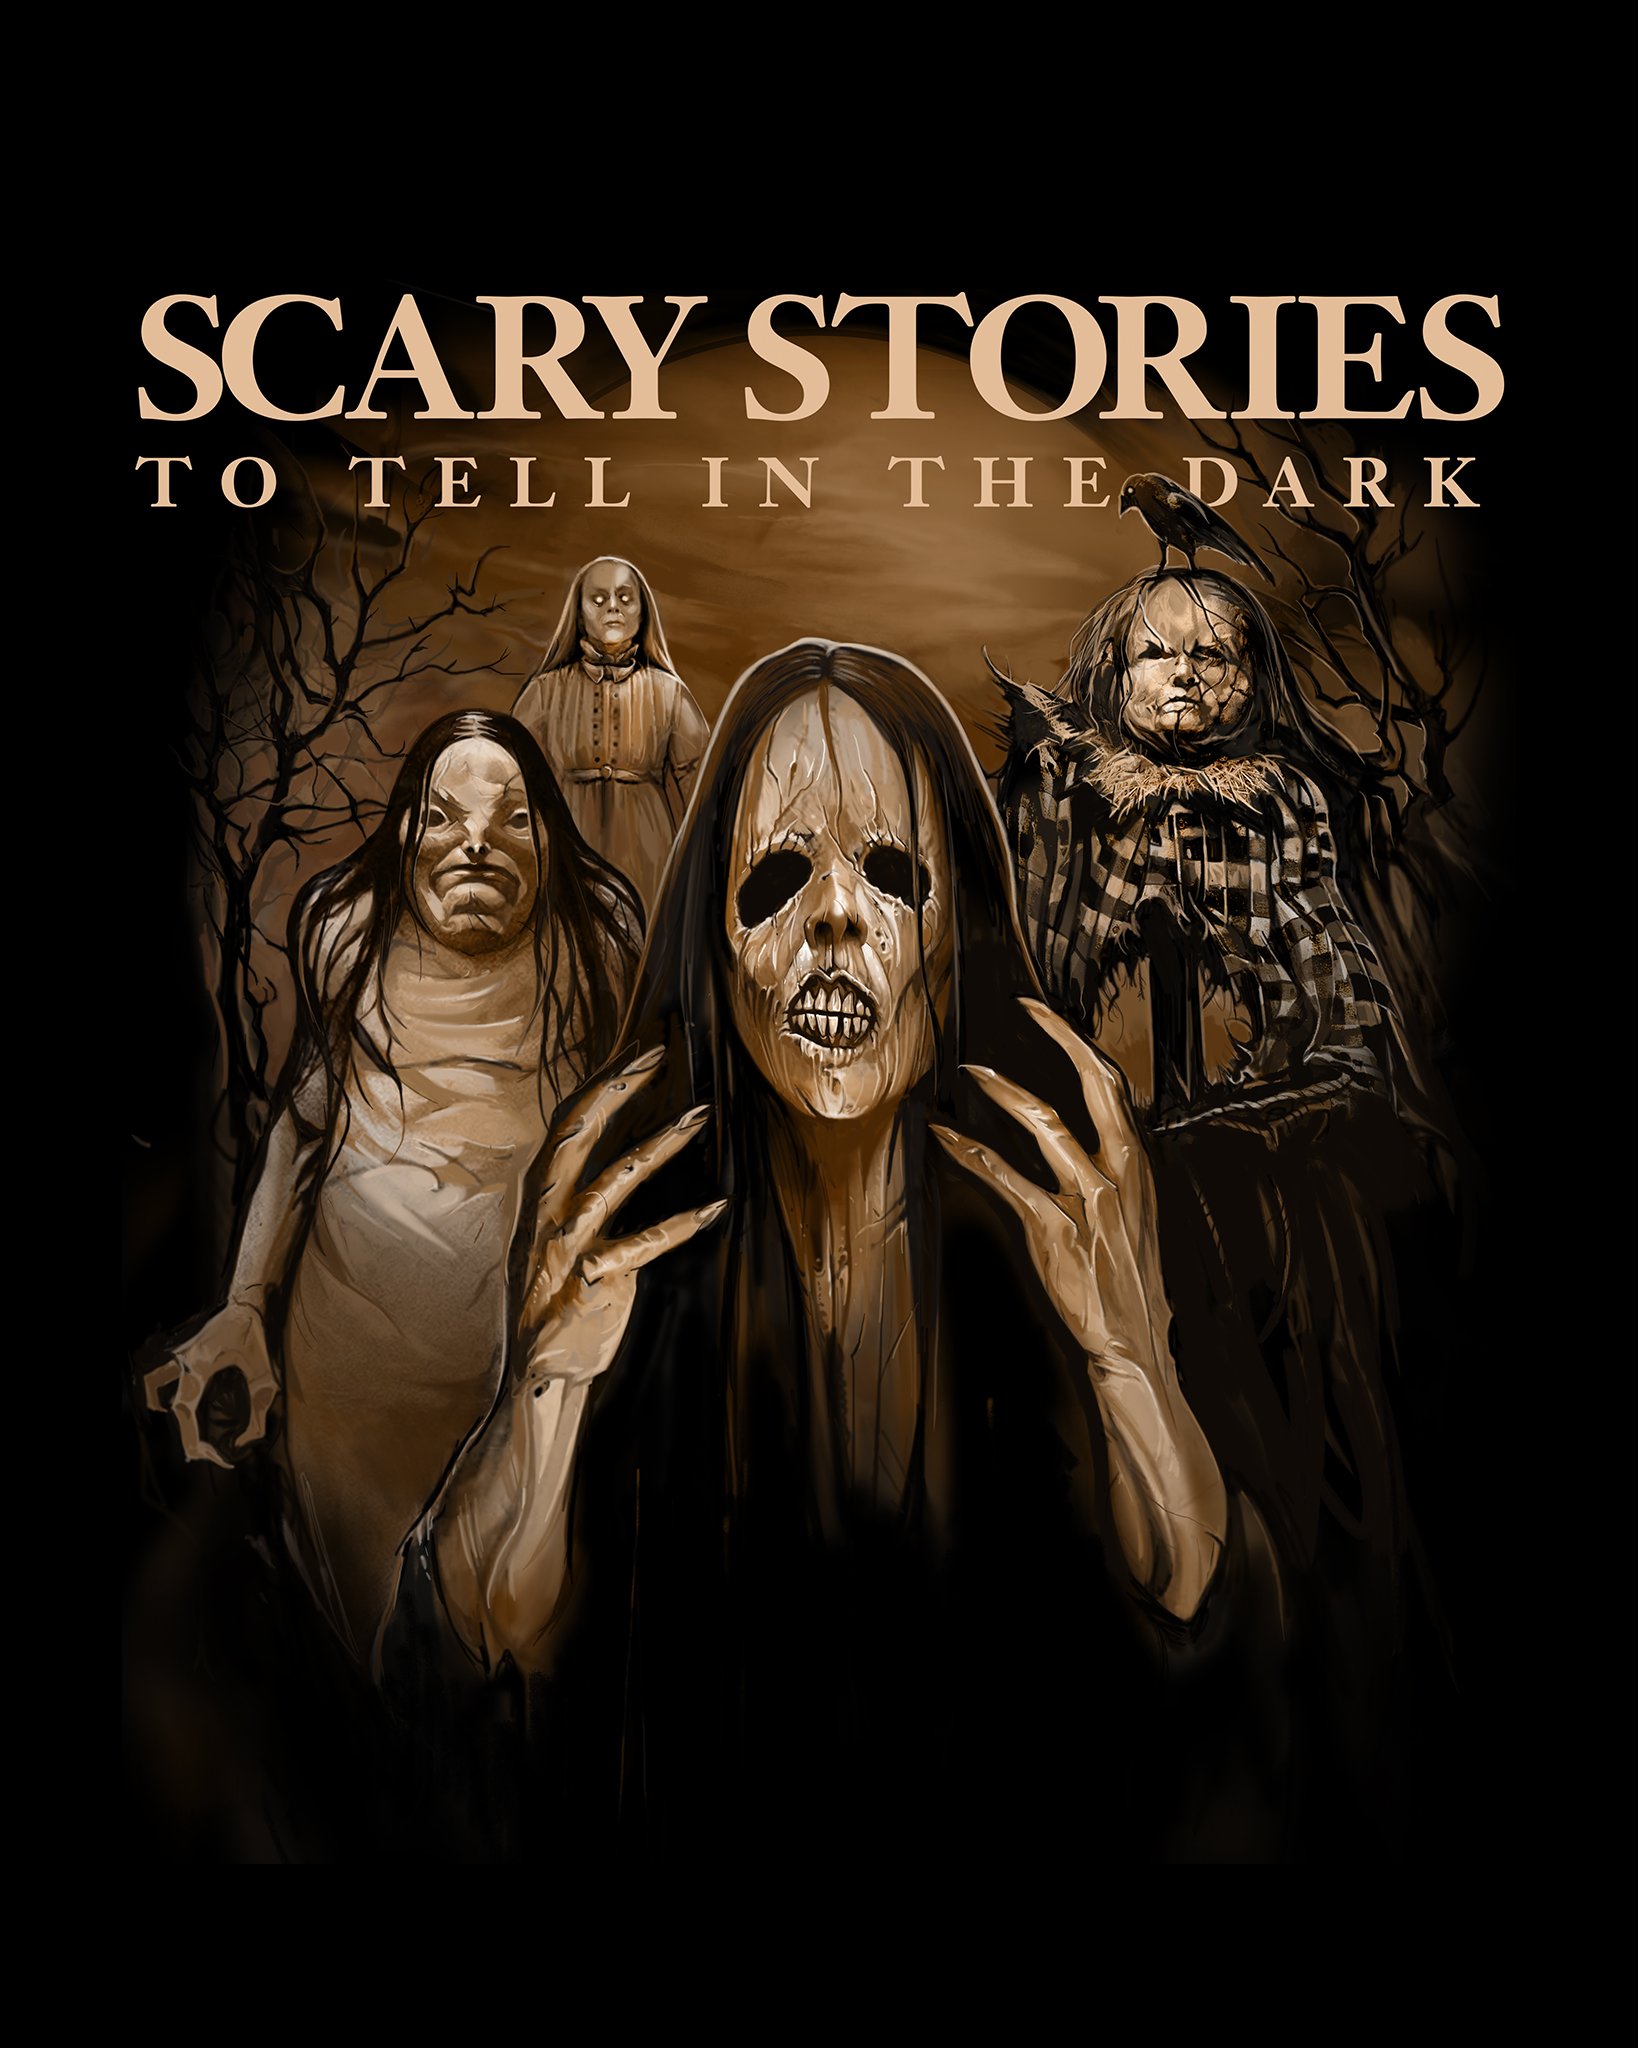 Scary story to tell. Scary stories to tell in the Dark книга. Scary stories to tell in the Dark Гарольд.